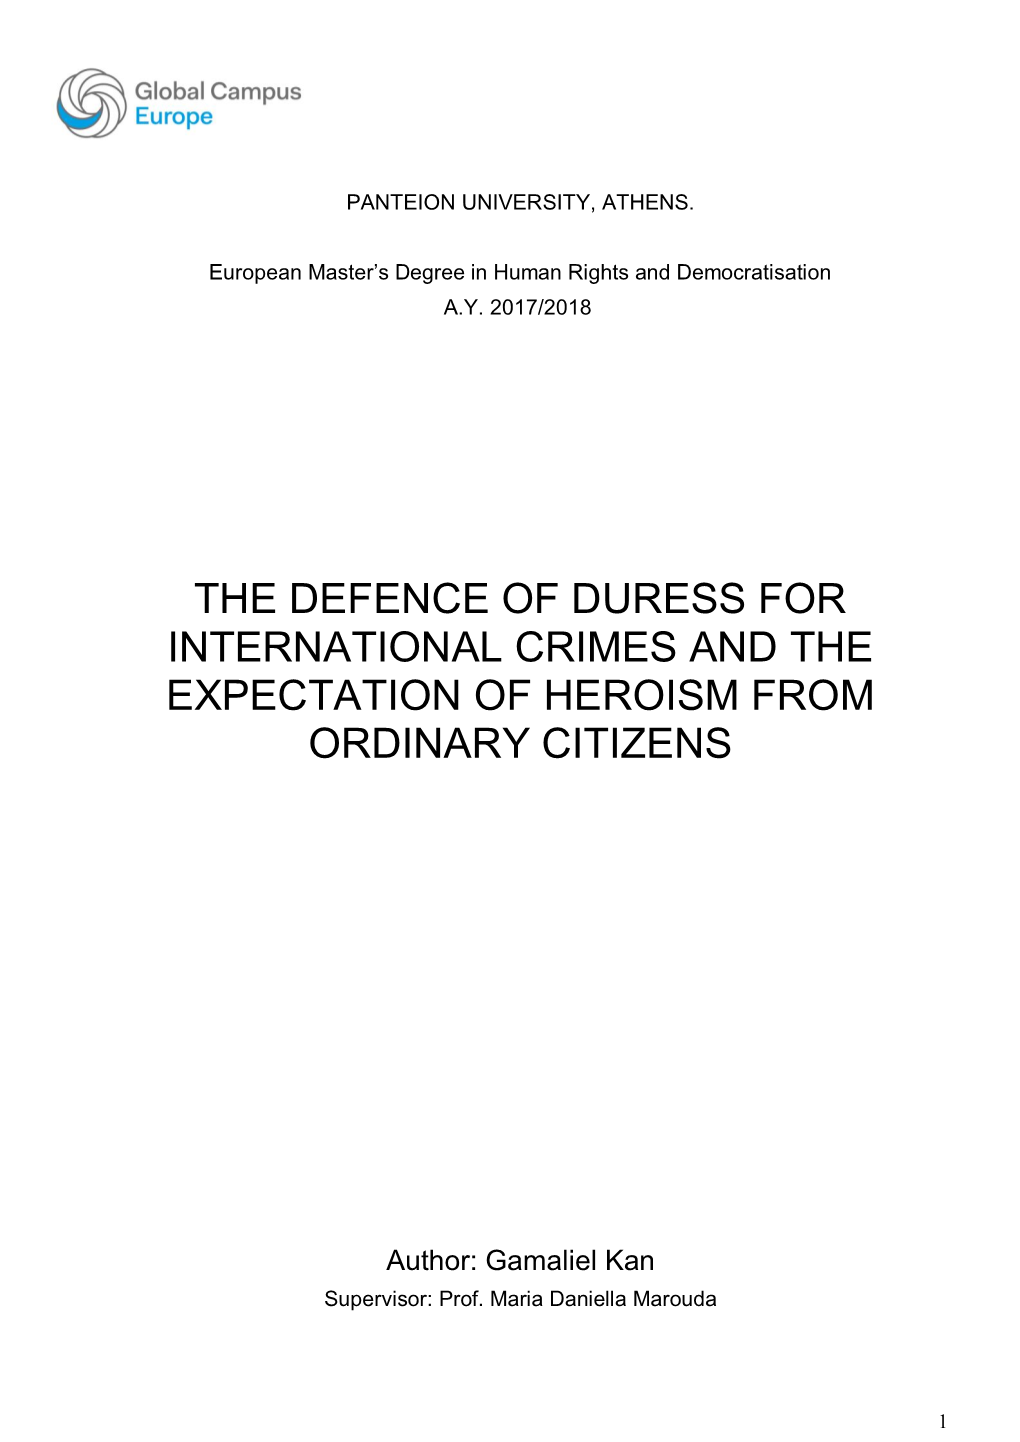 The Defence of Duress for International Crimes and the Expectation of Heroism from Ordinary Citizens